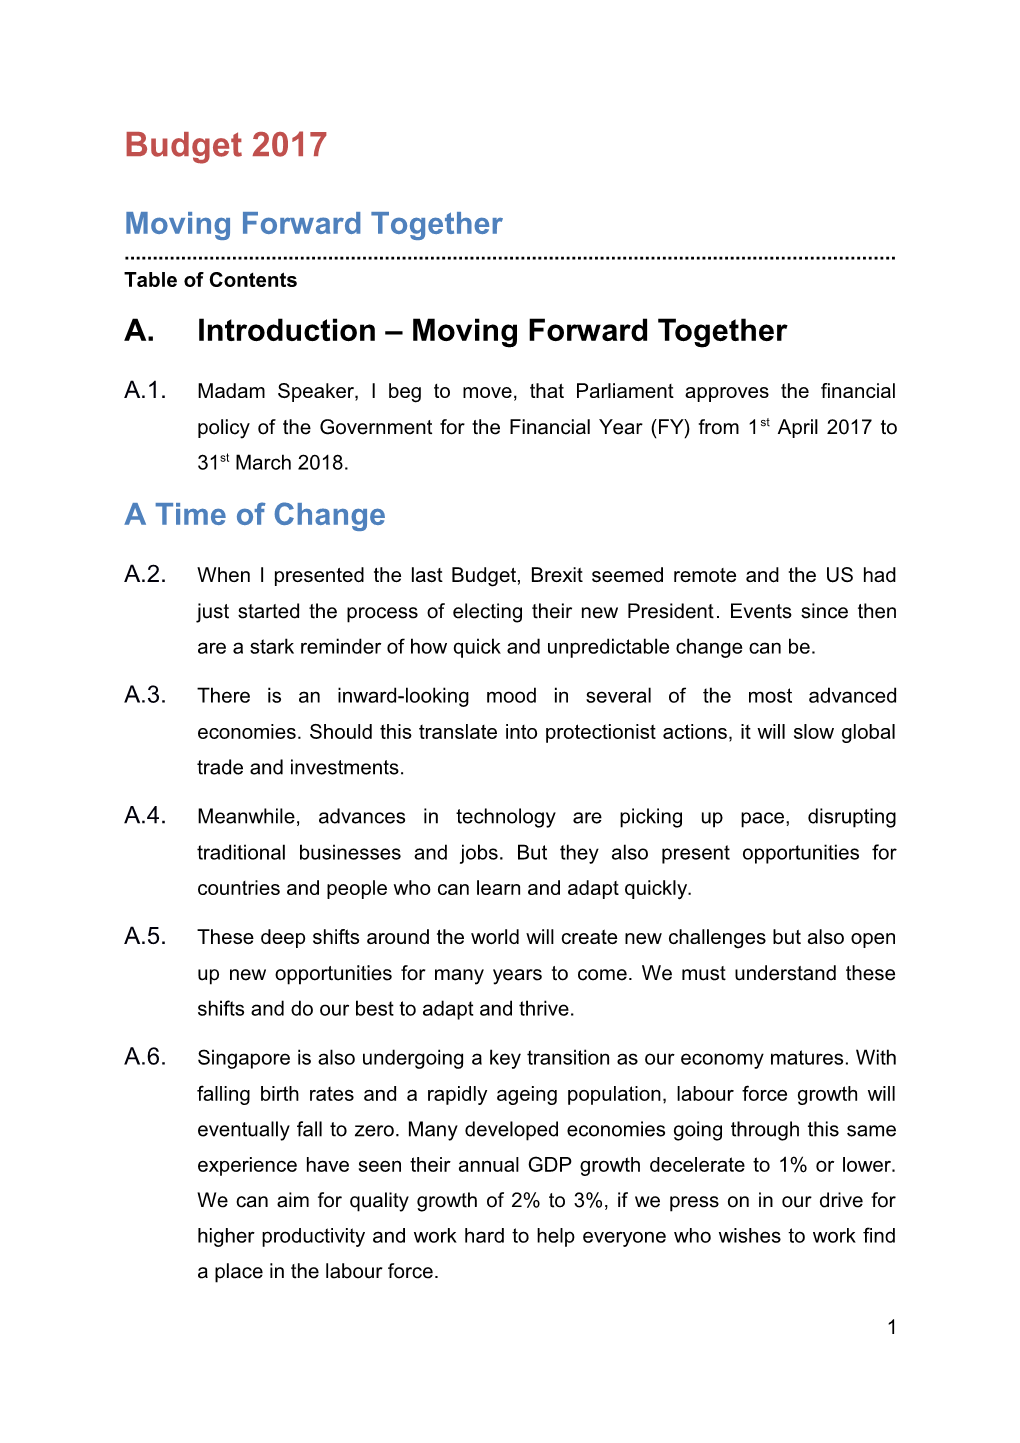 A. Introduction Moving Forward Together